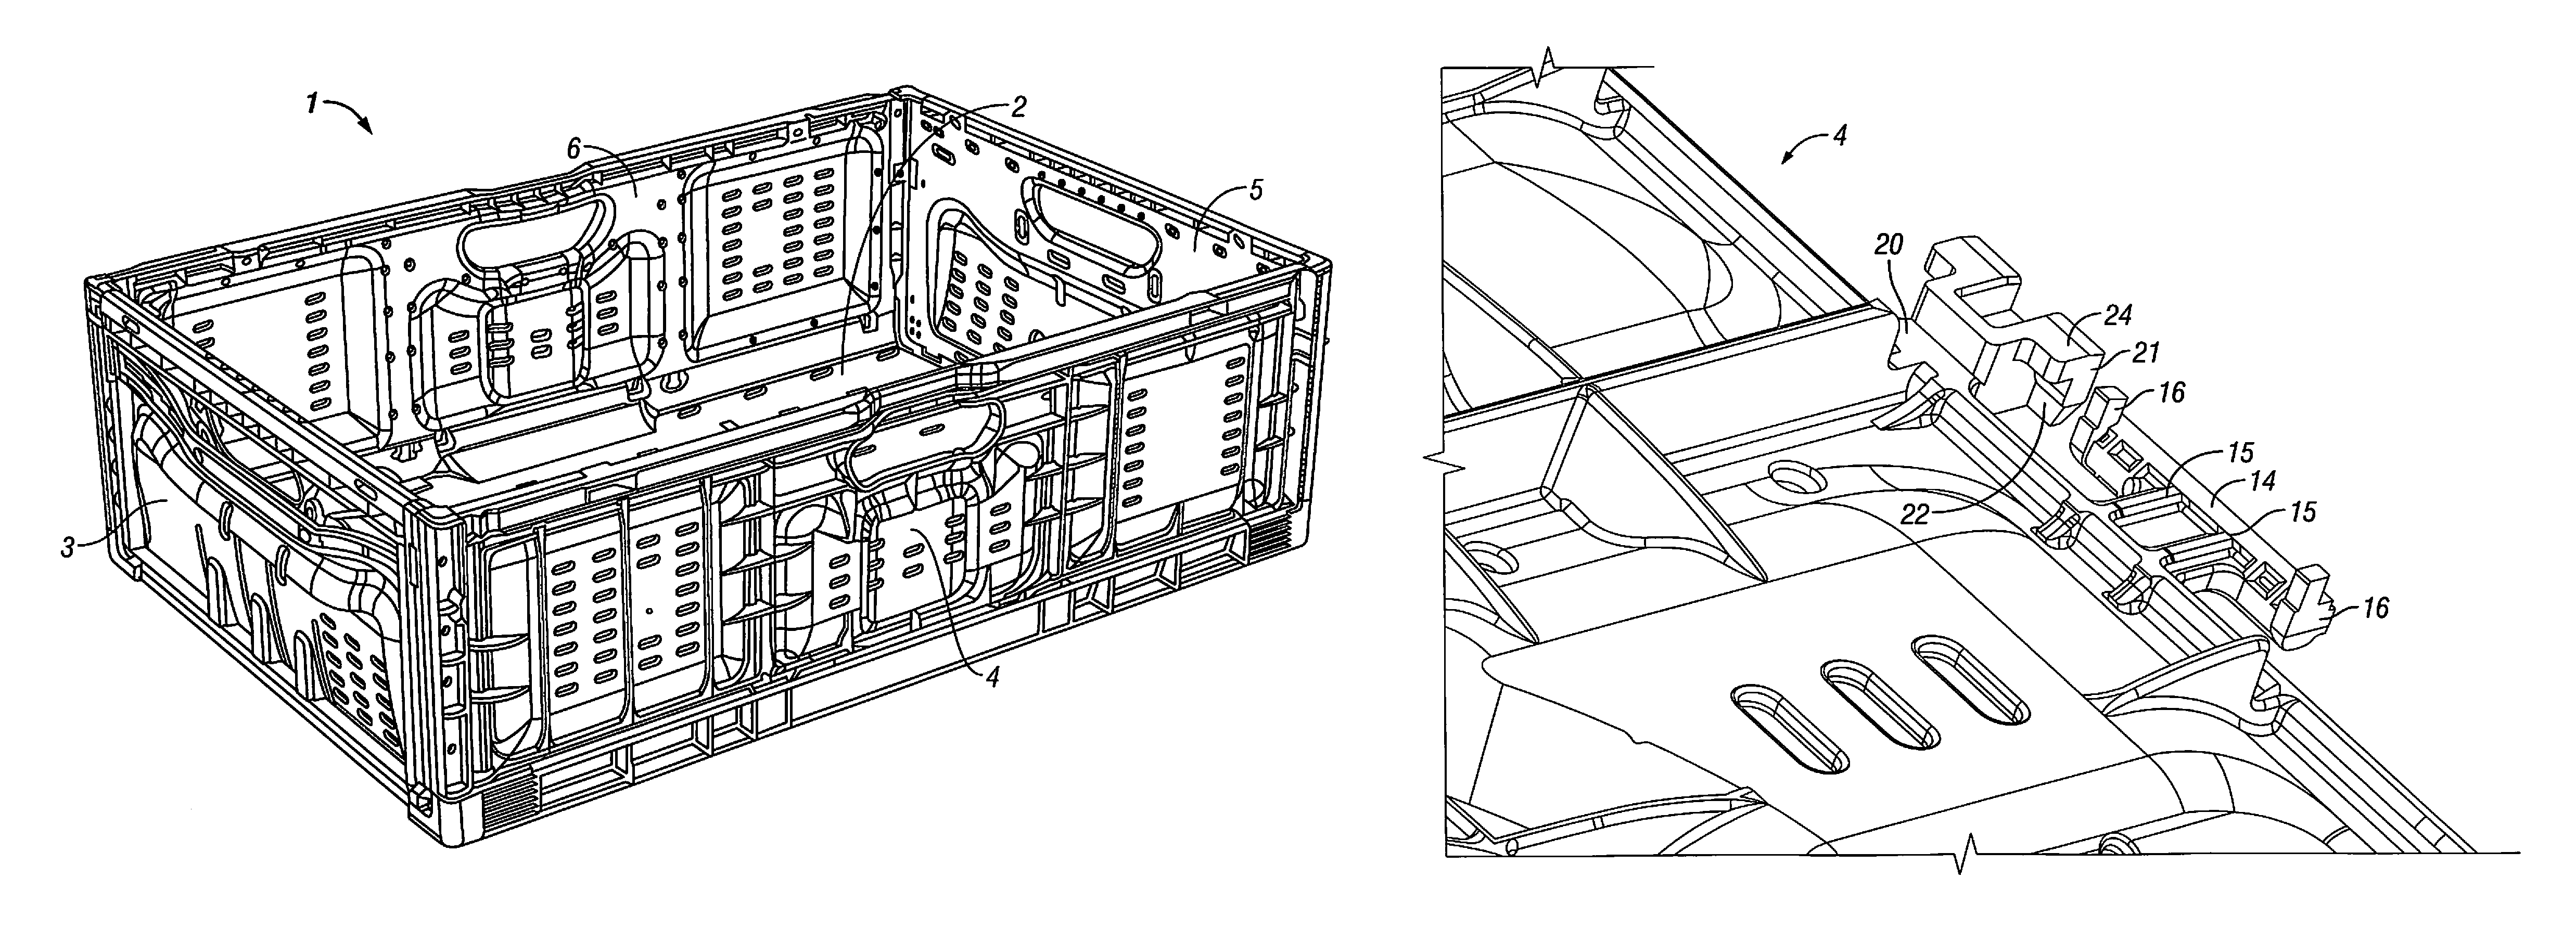 Container comprising a collapsible sidewall